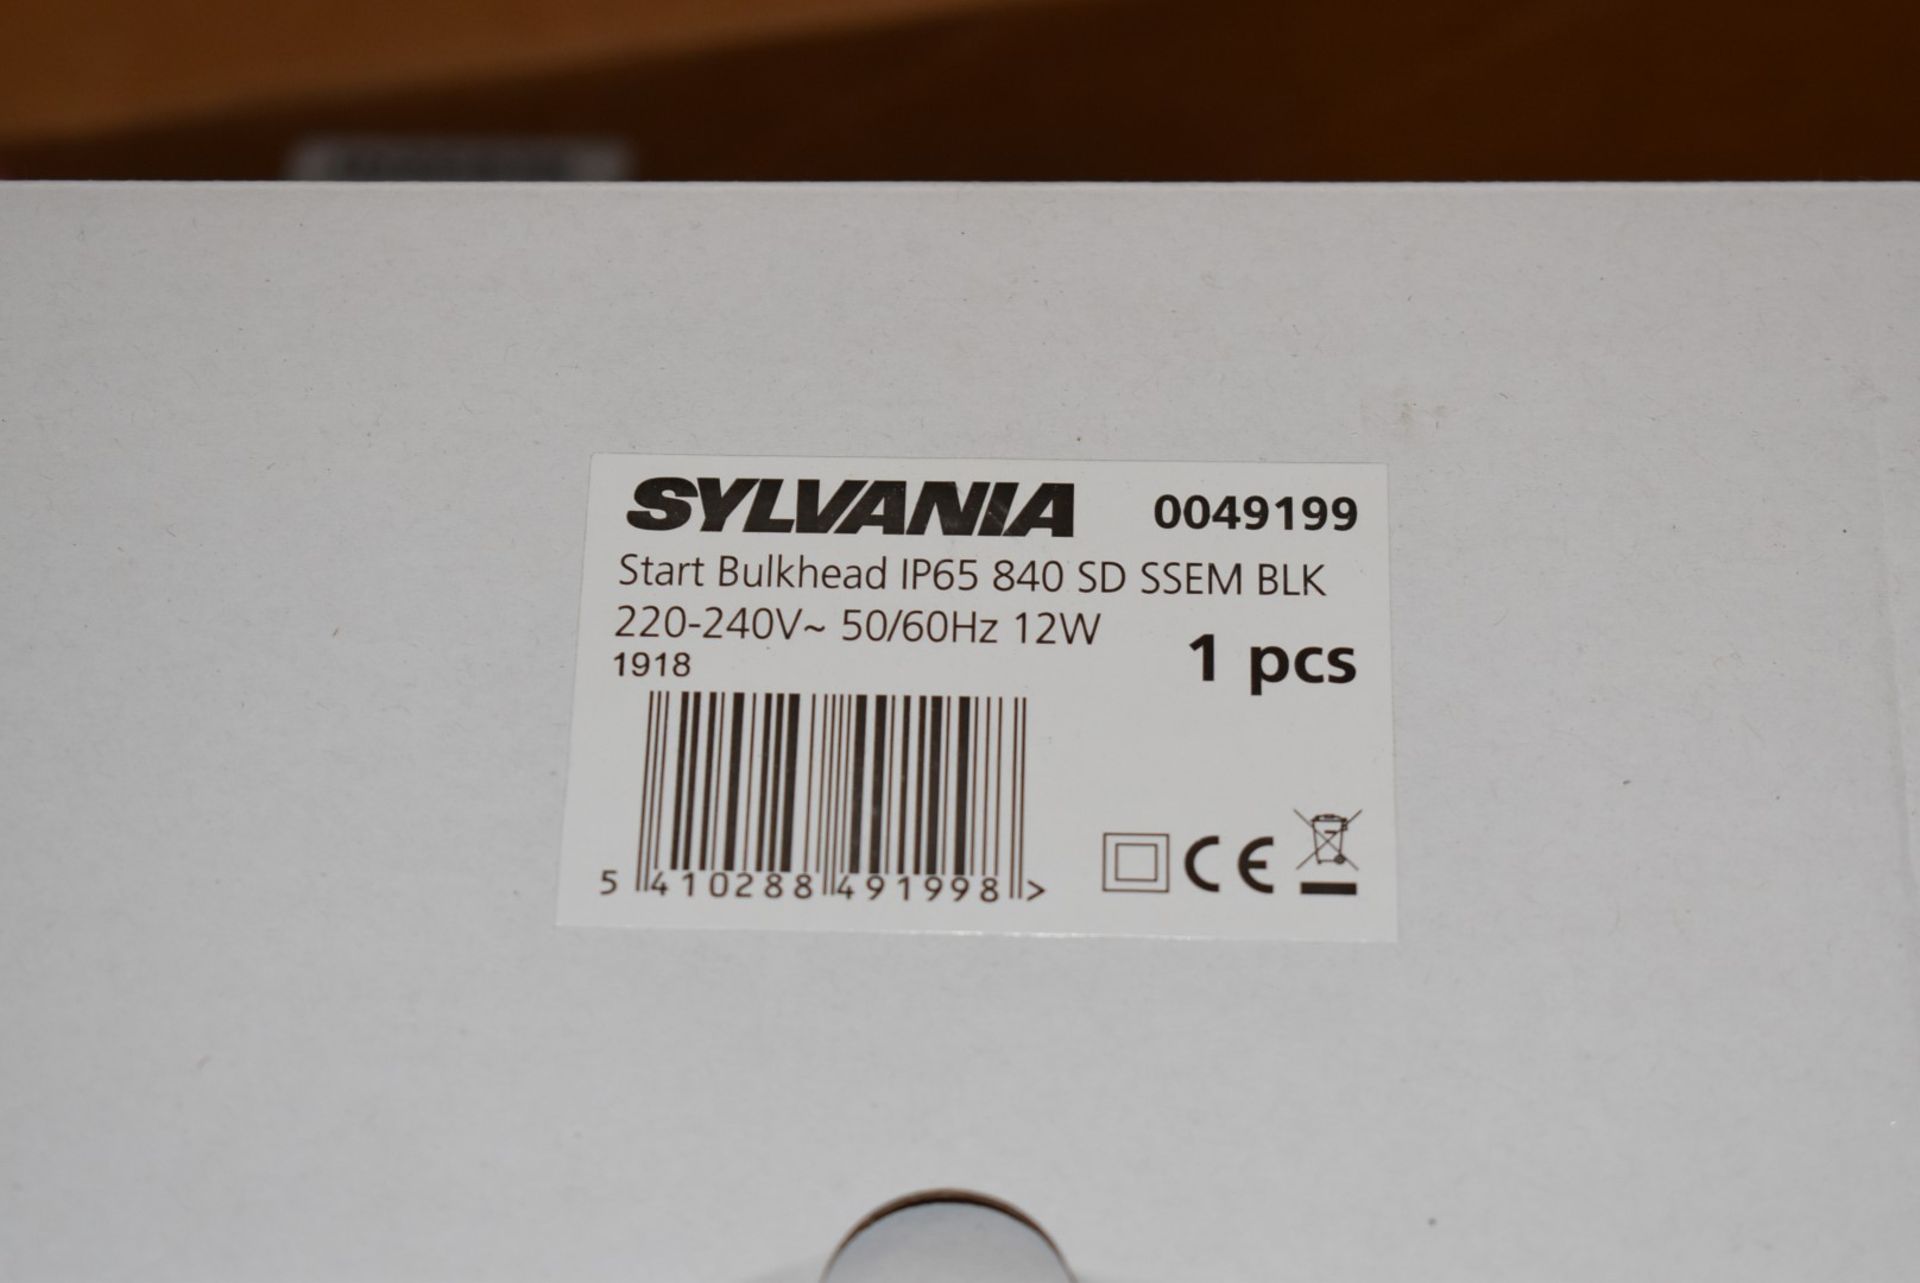 5 x Sylvania IP65 Bulkhead Lights in Black - Product Code: 0049199 - New Boxed Stock - Image 4 of 5